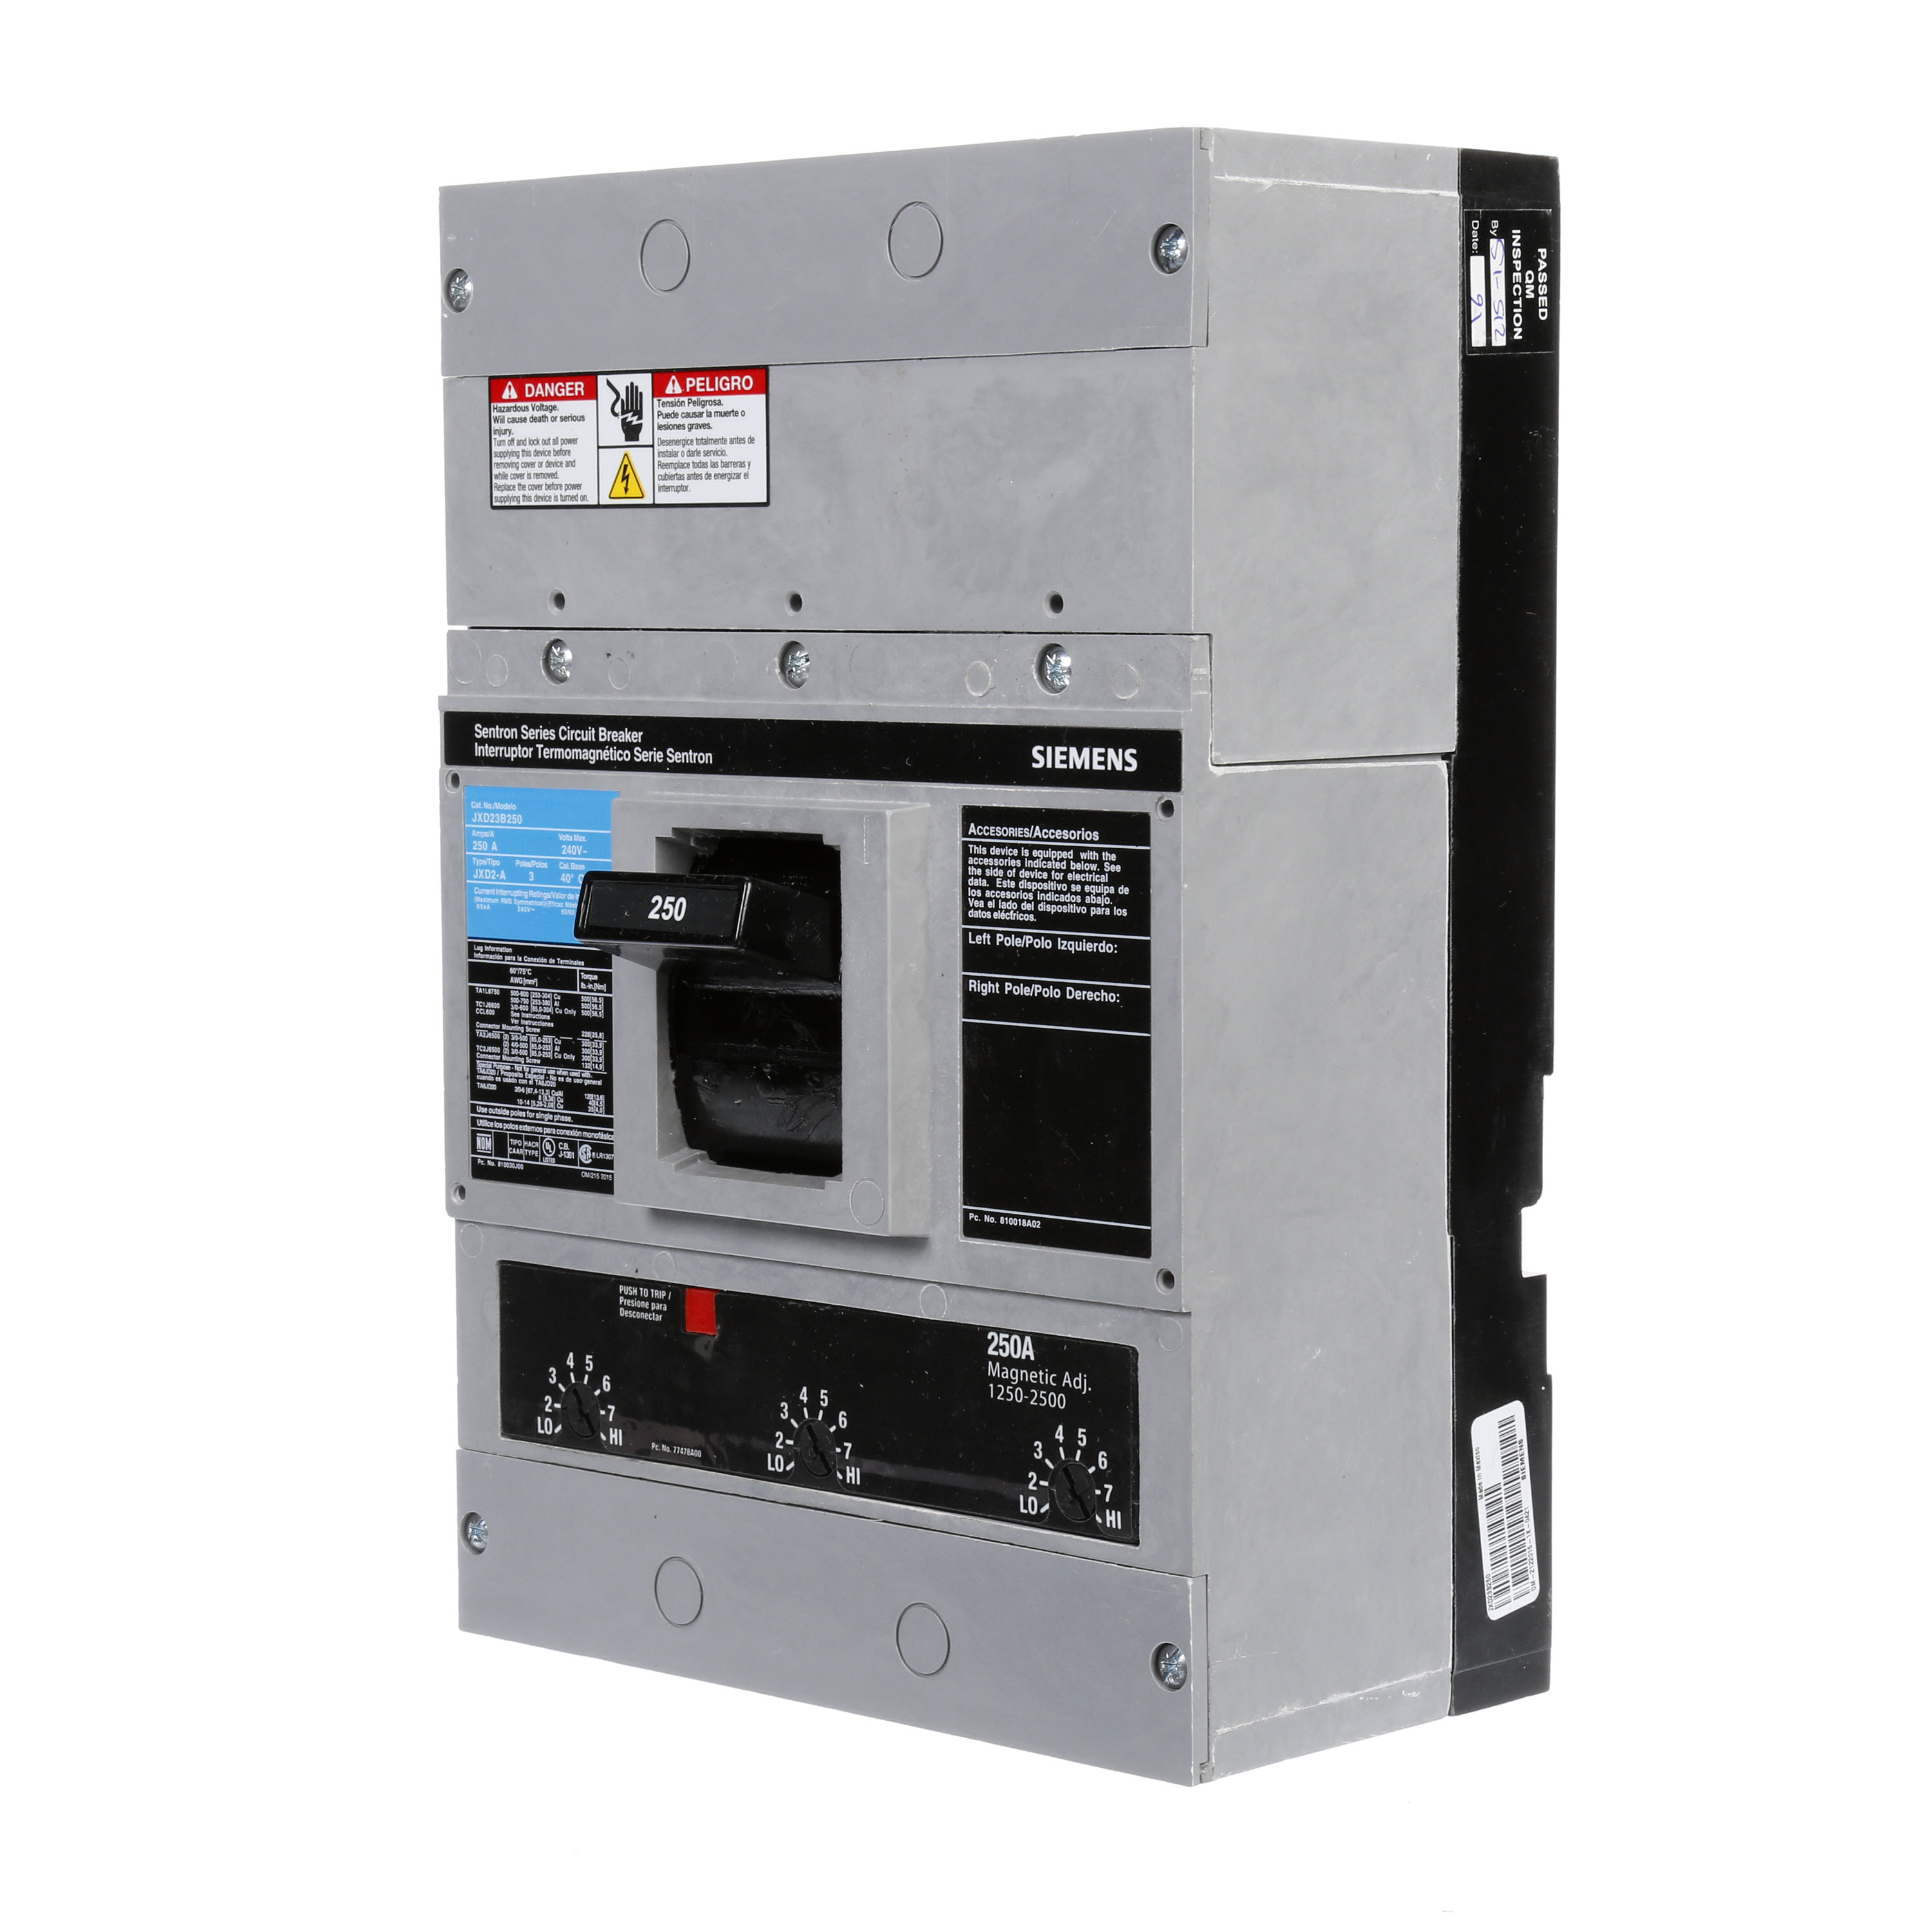 SIEMENS LOW VOLTAGE SENTRON MOLDED CASE CIRCUIT BREAKER WITH THERMAL - MAGNETICTRIP UNIT. ASSEMBLED STANDARD 40 DEG C BREAKER JD FRAME WITH STANDARD BREAKING CAPACITY. 250A 3-POLE (65KAIC AT 240V). NON-INTERCHANGEABLE TRIP UNIT. SPECIAL FEATURES NO LUGS INSTALLED. DIMENSIONS (W x H x D) IN 7.50 x 11.0 x 4.00.